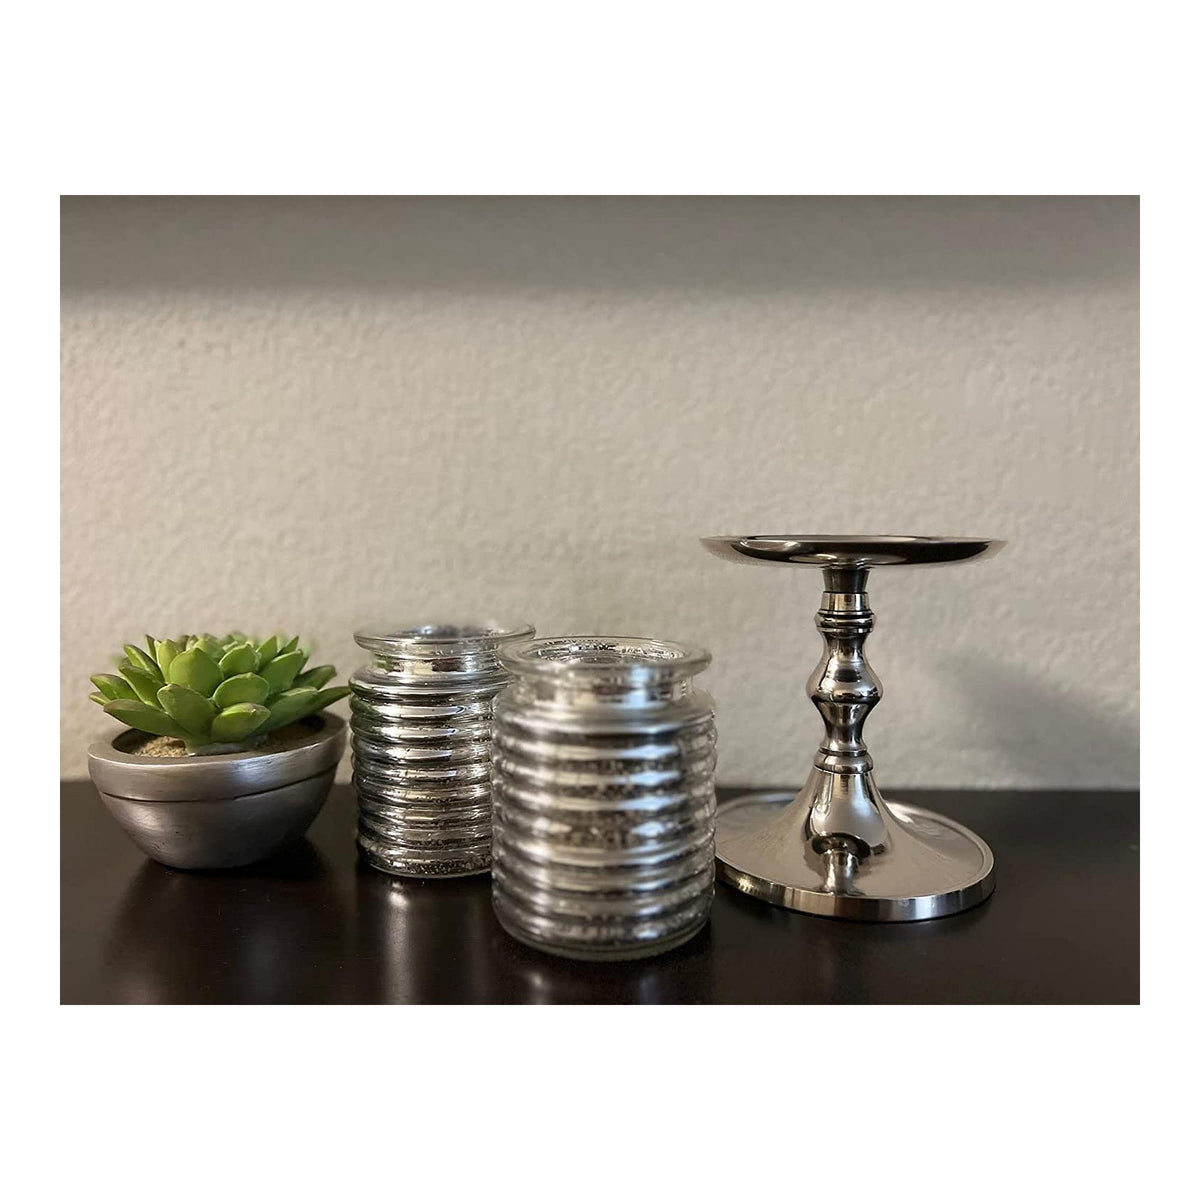 HOSLEY®  Metal Pillar Holder, Silver Finish, Set of 2, 5 inches High each